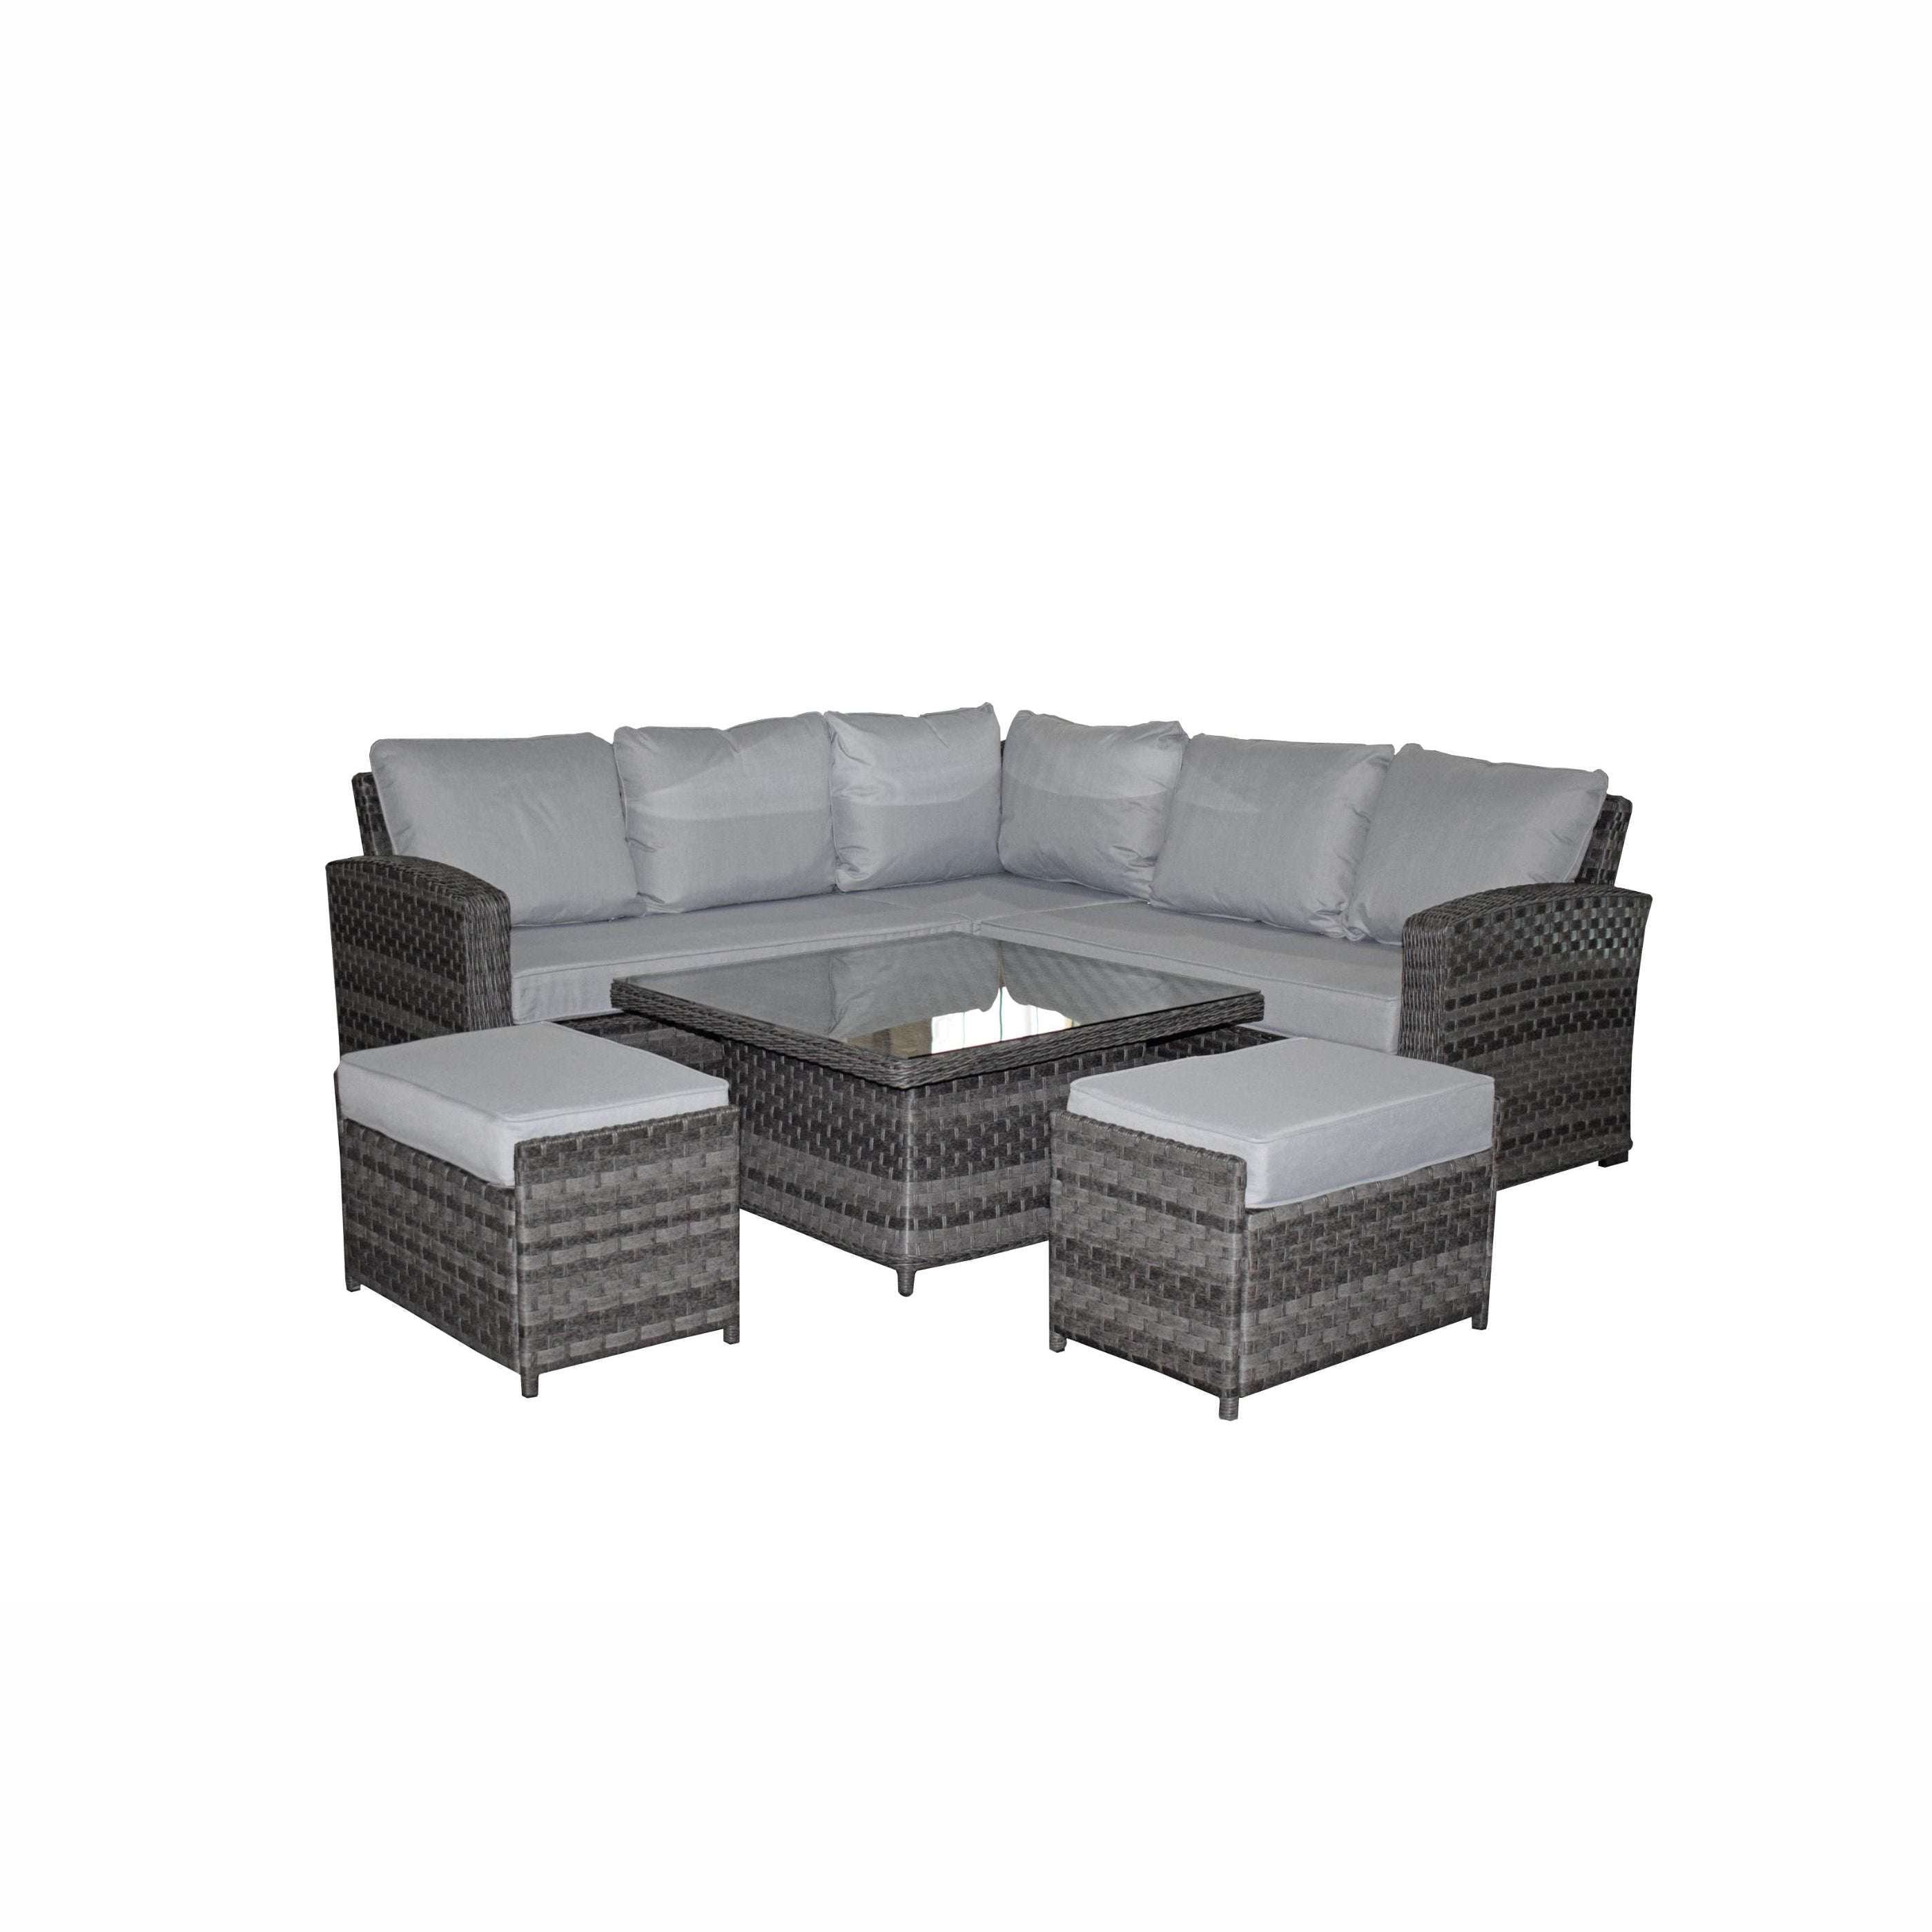 Exceptional Garden:Signature Weave Grace Corner Dining Set with Lifting Table